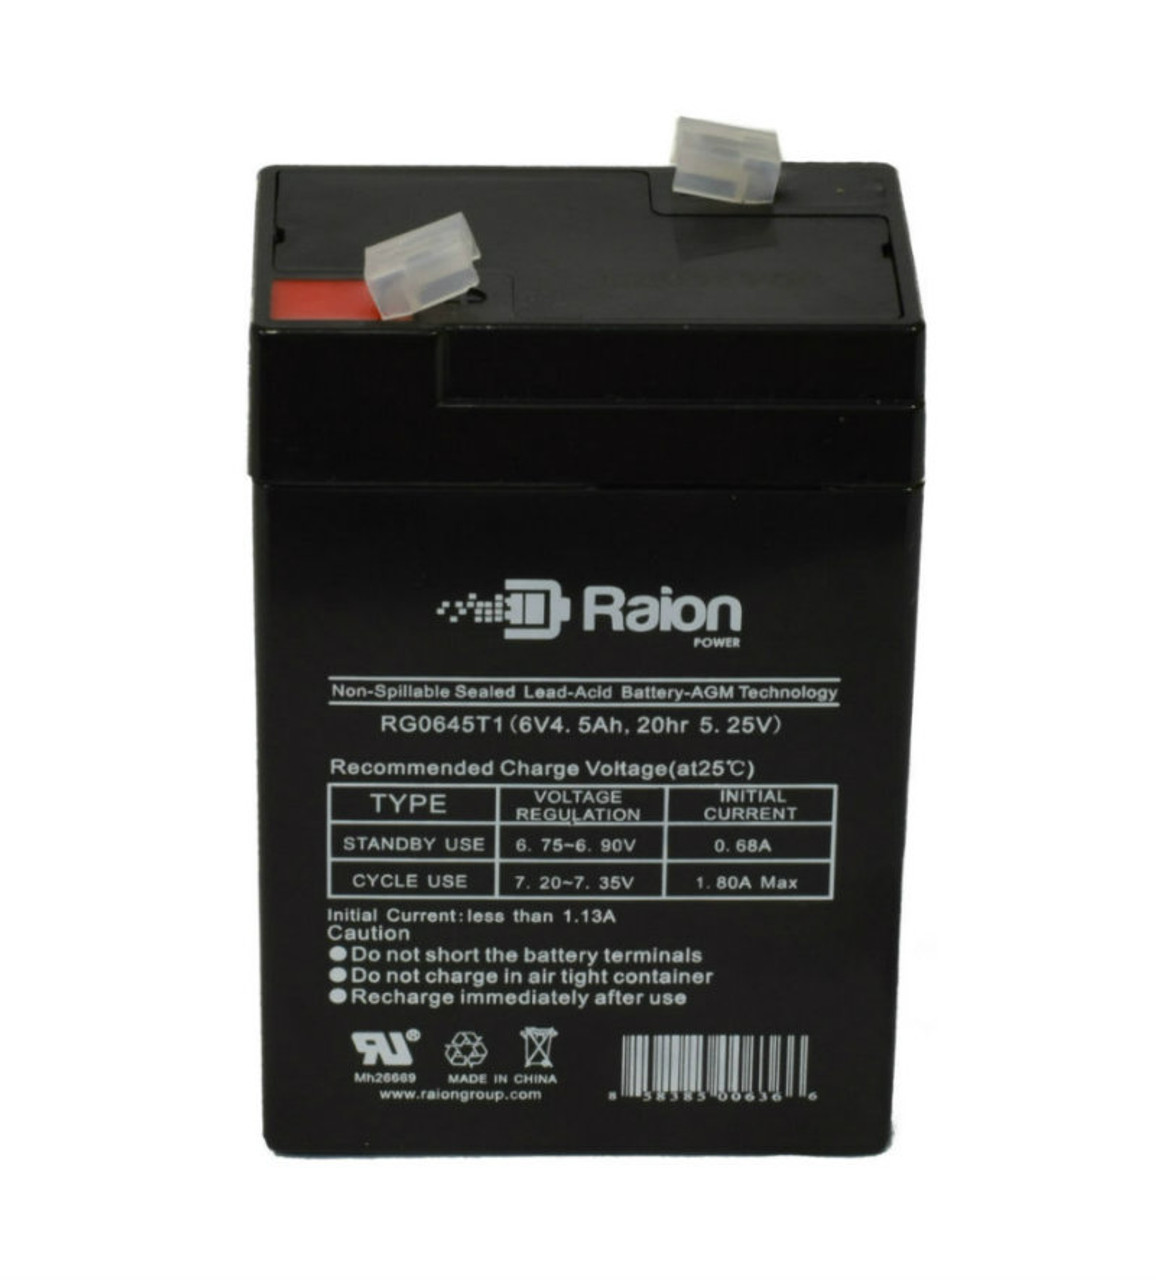 Raion Power RG0645T1 Replacement Battery Cartridge for Eagle Picher CF-6V4.5